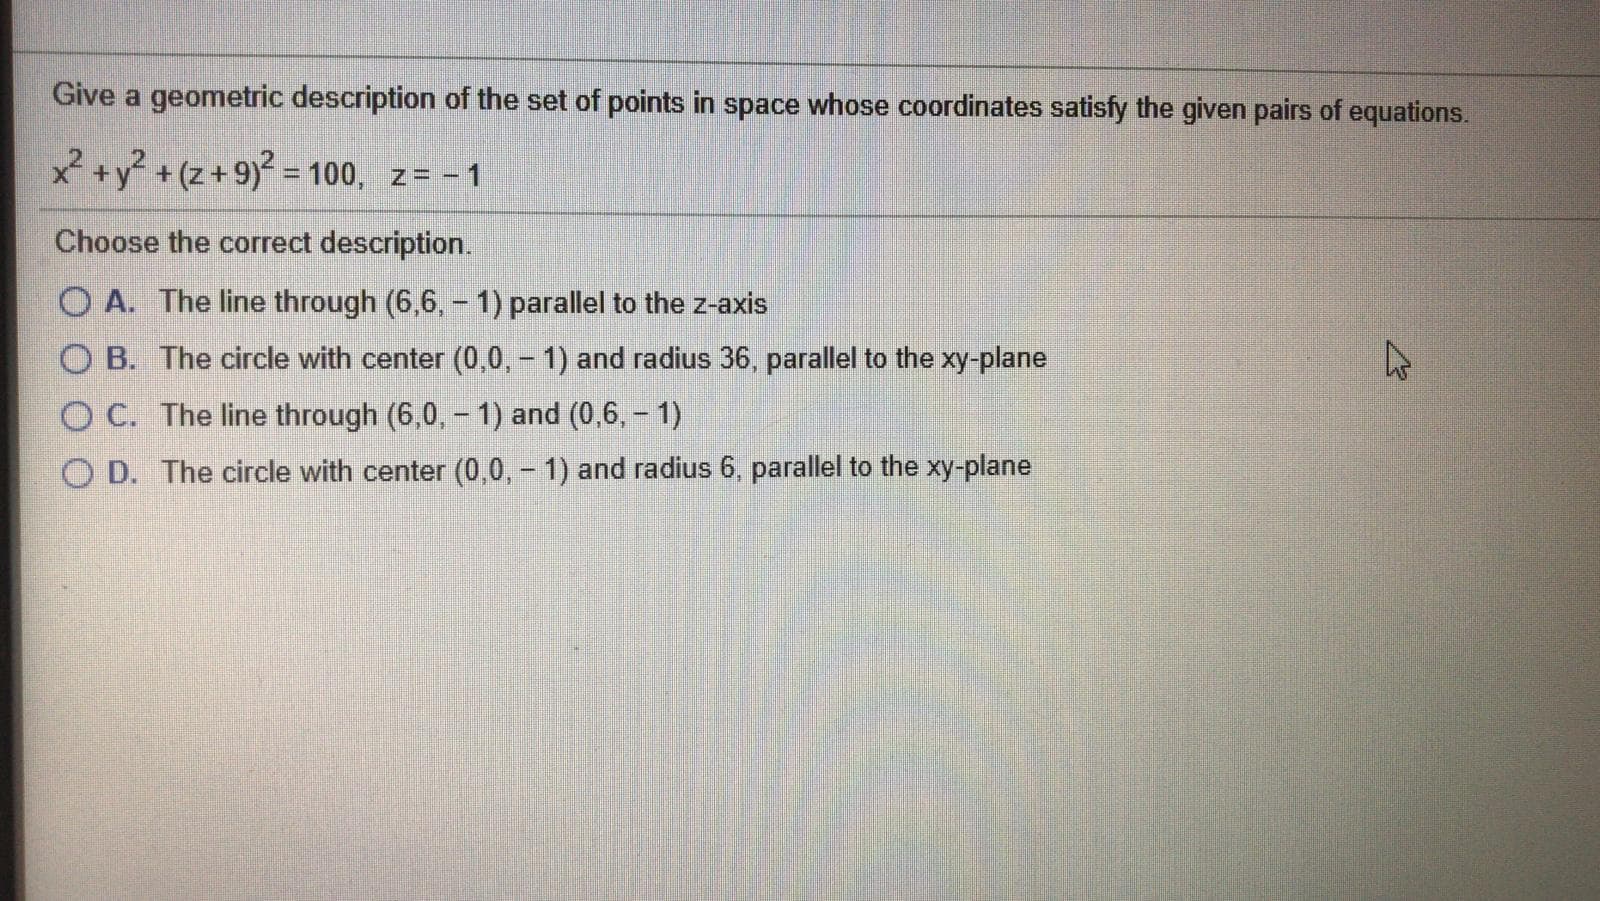 Give a geometric description of the set of points in space whose coordinates satisfy the given pairs of equations.
x +y? + (z+9)² = 100, z= - 1
%3D
Choose the correct description.
O A. The line through (6,6, - 1) parallel to the z-axis
O B. The circle with center (0,0, - 1) and radius 36, parallel to the xy-plane
O C. The line through (6,0,- 1) and (0,6, - 1)
O D. The circle with center (0,0,- 1) and radius 6, parallel to the xy-plane
